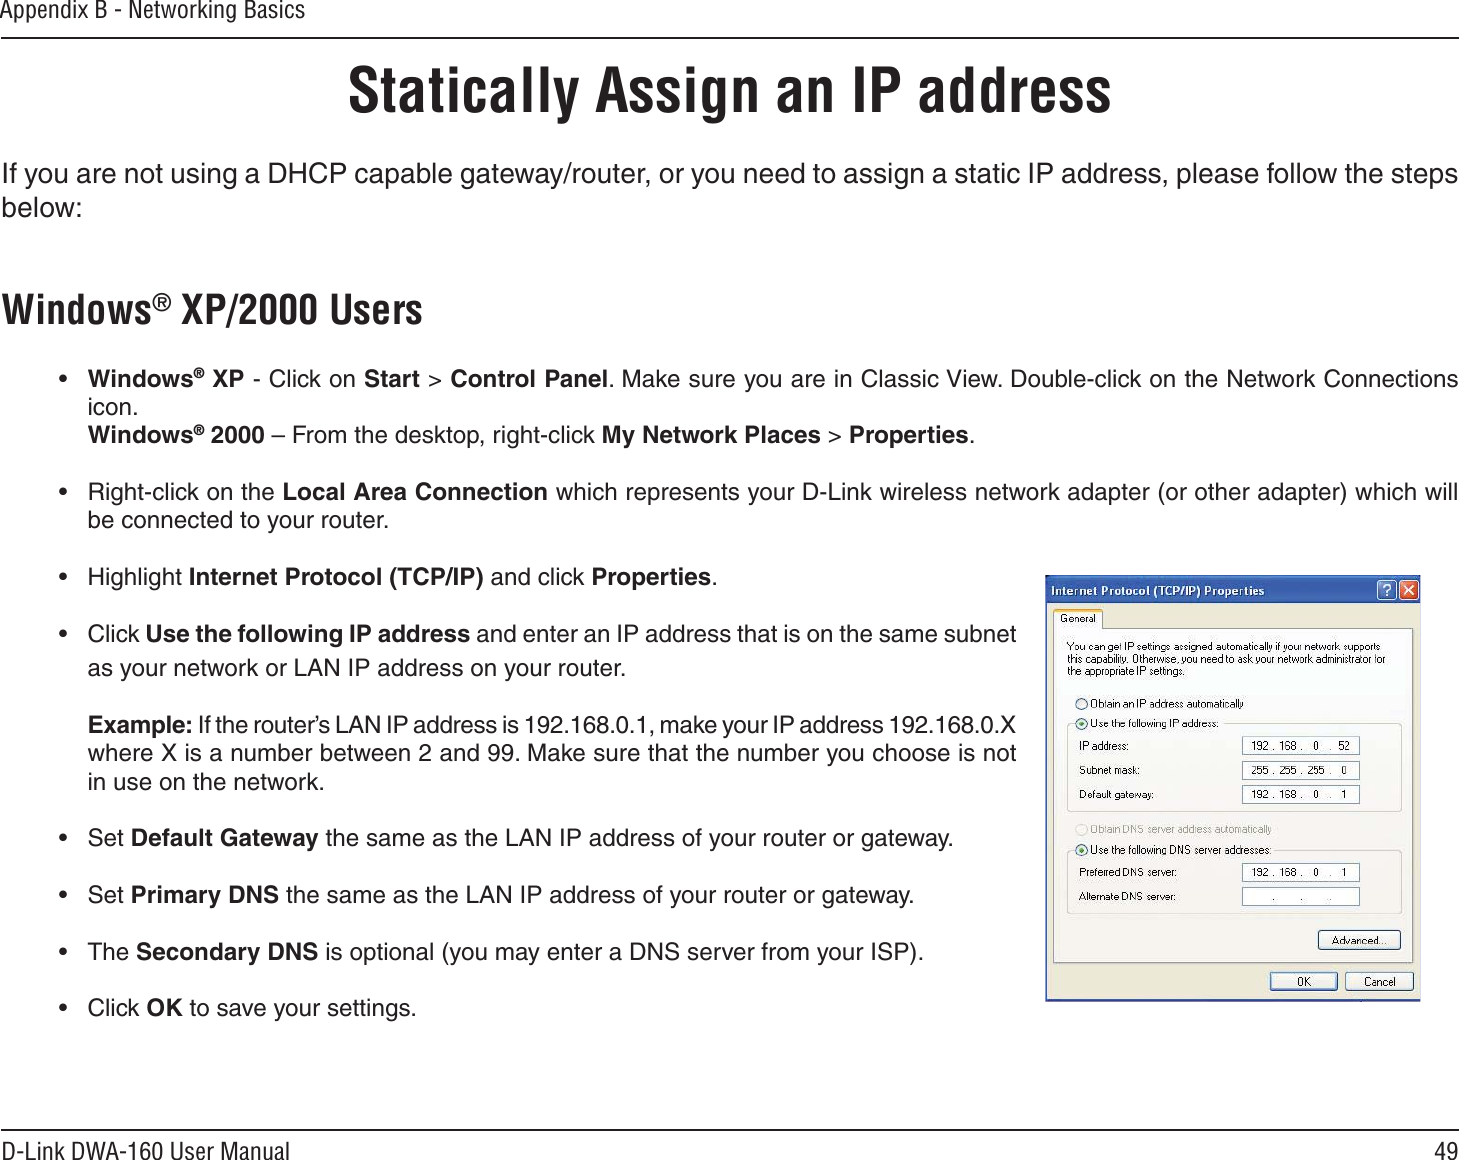 49D-Link DWA-160 User ManualAppendix B - Networking BasicsStatically Assign an IP addressIf you are not using a DHCP capable gateway/router, or you need to assign a static IP address, please follow the steps below:Windows® XP/2000 Users•Windows® XP - Click on Start &gt; Control Panel. Make sure you are in Classic View. Double-click on the Network Connections icon.Windows® 2000 – From the desktop, right-click My Network Places &gt; Properties.• Right-click on the Local Area Connection which represents your D-Link wireless network adapter (or other adapter) which will be connected to your router.• Highlight Internet Protocol (TCP/IP) and click Properties.• Click Use the following IP address and enter an IP address that is on the same subnet as your network or LAN IP address on your router.Example: If the router’s LAN IP address is 192.168.0.1, make your IP address 192.168.0.X where X is a number between 2 and 99. Make sure that the number you choose is not in use on the network. • Set Default Gateway the same as the LAN IP address of your router or gateway.• Set Primary DNS the same as the LAN IP address of your router or gateway. • The Secondary DNS is optional (you may enter a DNS server from your ISP).• Click OK to save your settings.